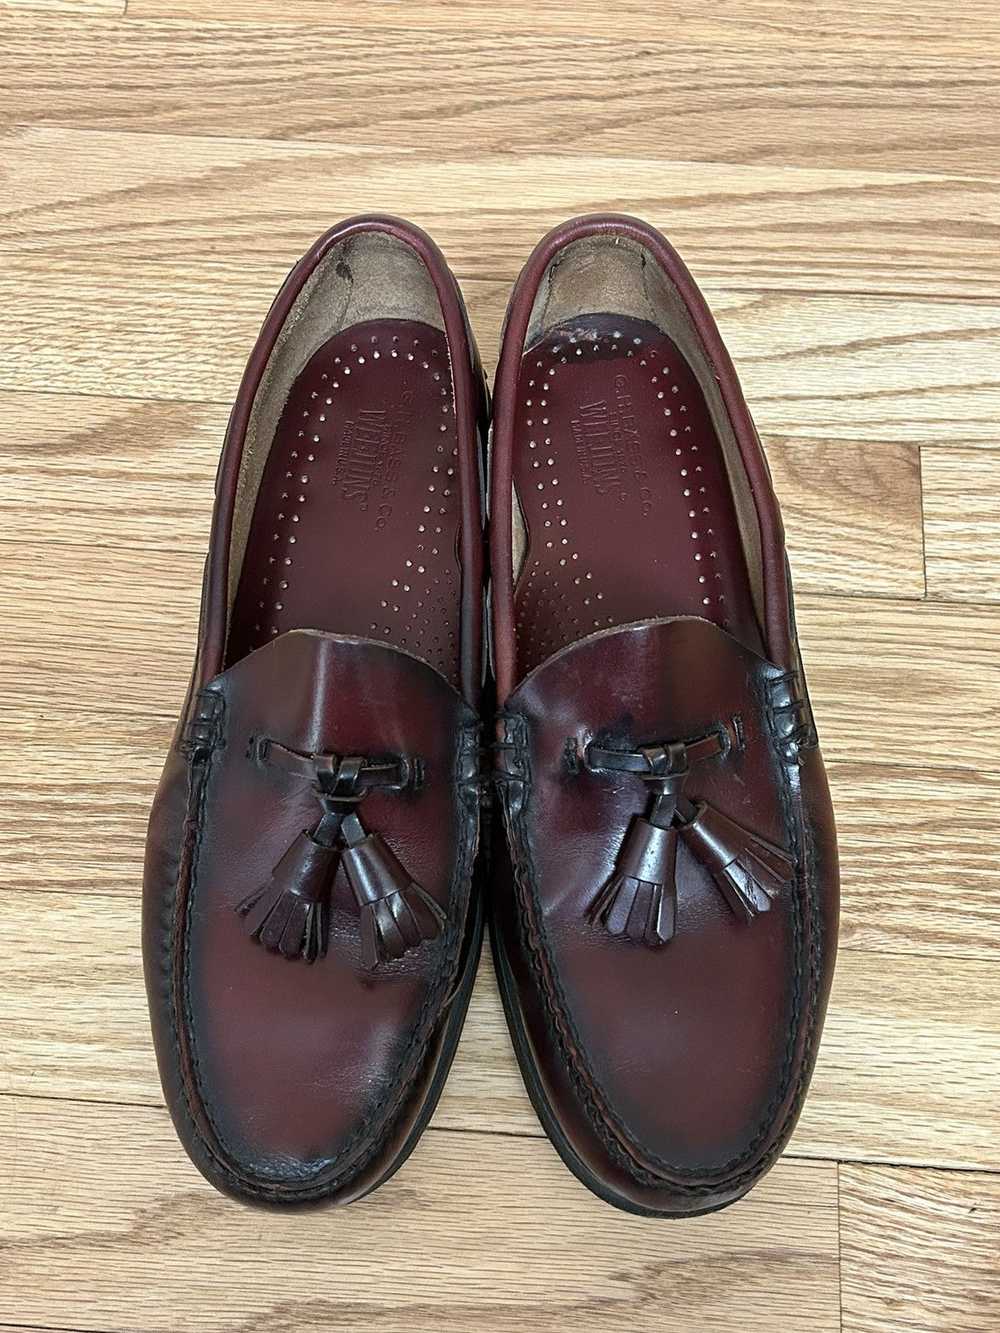 G.H. Bass & Co. G.H Bass Tassel Leather Loafers - image 2